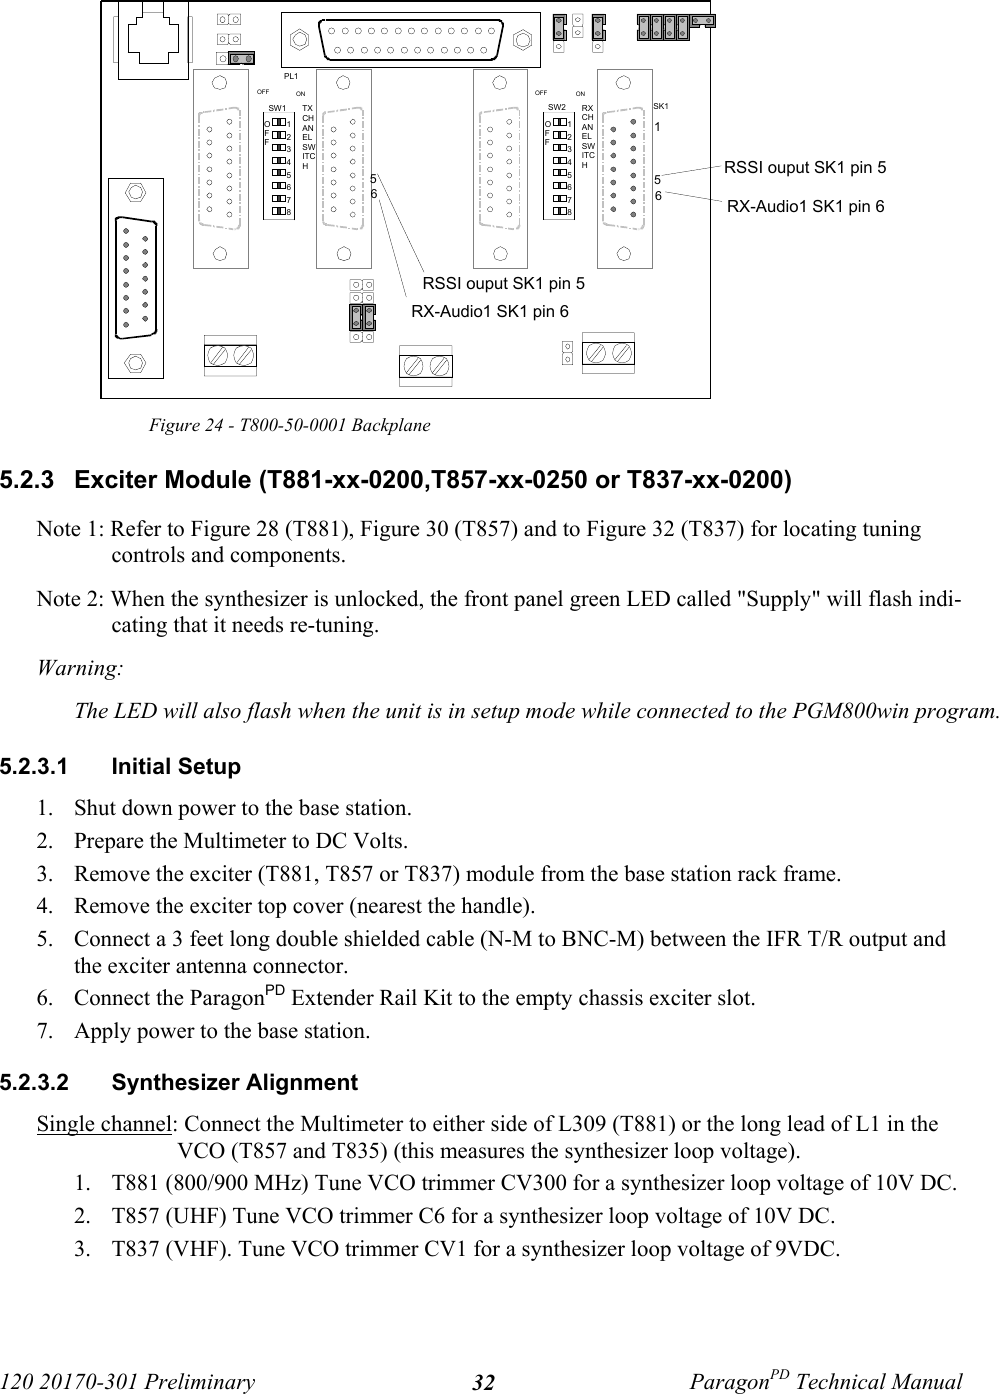 120 20170-301 Preliminary ParagonPD Technical Manual32Figure 24 - T800-50-0001 Backplane5.2.3  Exciter Module (T881-xx-0200,T857-xx-0250 or T837-xx-0200)Note 1: Refer to Figure 28 (T881), Figure 30 (T857) and to Figure 32 (T837) for locating tuningcontrols and components. Note 2: When the synthesizer is unlocked, the front panel green LED called &quot;Supply&quot; will flash indi-cating that it needs re-tuning. Warning: The LED will also flash when the unit is in setup mode while connected to the PGM800win program. 5.2.3.1  Initial Setup1. Shut down power to the base station.2. Prepare the Multimeter to DC Volts.3. Remove the exciter (T881, T857 or T837) module from the base station rack frame.4. Remove the exciter top cover (nearest the handle).5. Connect a 3 feet long double shielded cable (N-M to BNC-M) between the IFR T/R output andthe exciter antenna connector.6. Connect the ParagonPD Extender Rail Kit to the empty chassis exciter slot.7. Apply power to the base station.5.2.3.2  Synthesizer Alignment Single channel: Connect the Multimeter to either side of L309 (T881) or the long lead of L1 in theVCO (T857 and T835) (this measures the synthesizer loop voltage). 1. T881 (800/900 MHz) Tune VCO trimmer CV300 for a synthesizer loop voltage of 10V DC.2. T857 (UHF) Tune VCO trimmer C6 for a synthesizer loop voltage of 10V DC.3. T837 (VHF). Tune VCO trimmer CV1 for a synthesizer loop voltage of 9VDC.12345678OFF12345678OFFSW2SW1 RXCHANELSWITCHTXCHANELSWITCHOFF ON OFF ONPL1SK1156RSSI ouput SK1 pin 5RX-Audio1 SK1 pin 656RX-Audio1 SK1 pin 6RSSI ouput SK1 pin 5